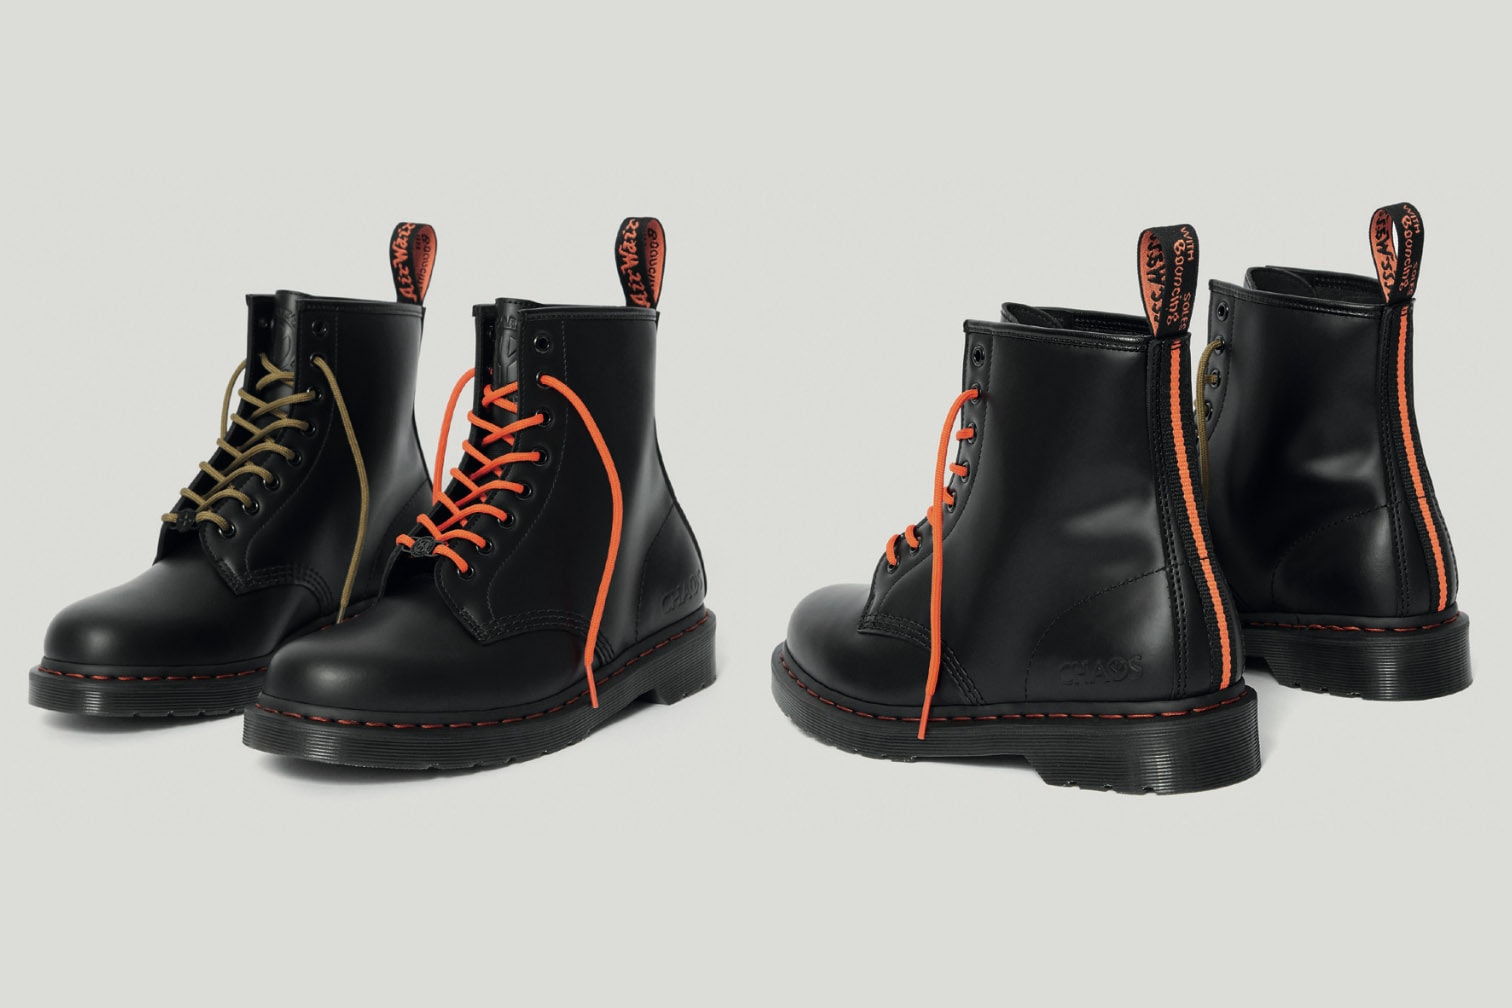 Dr. Martens x Beams x Babylon 1460 Remastered Boot Silhouette Release Collaboration Limited Edition